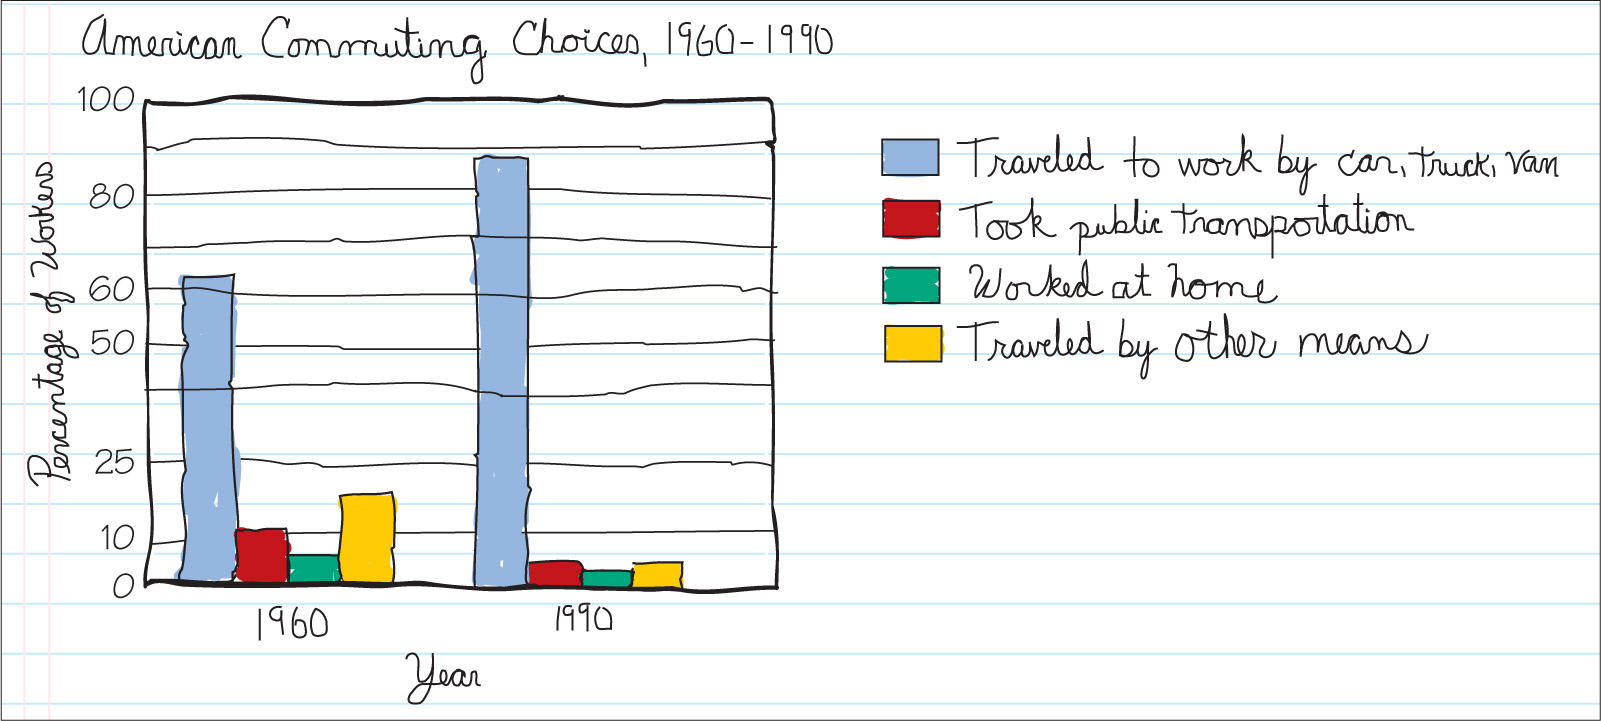 A hand-drawn graph shows American Commuting Choices from 1960 to 1990.